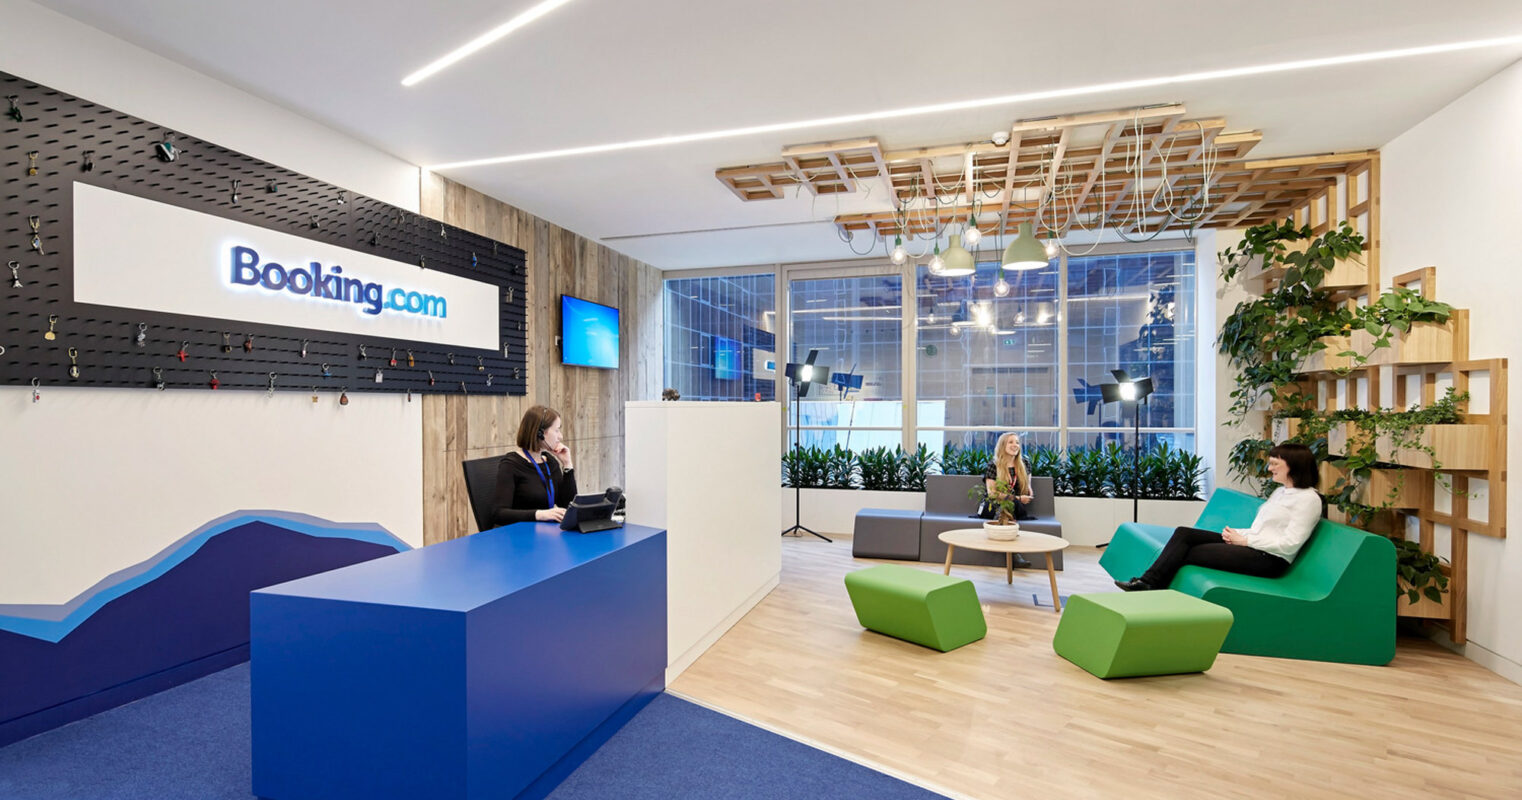 Bright, modern office reception area with a contemporary design featuring an illuminated logo on textured black wall, angular front desk, wood slat ceiling details, and vibrant green seating accents, fostering a dynamic and welcoming environment.